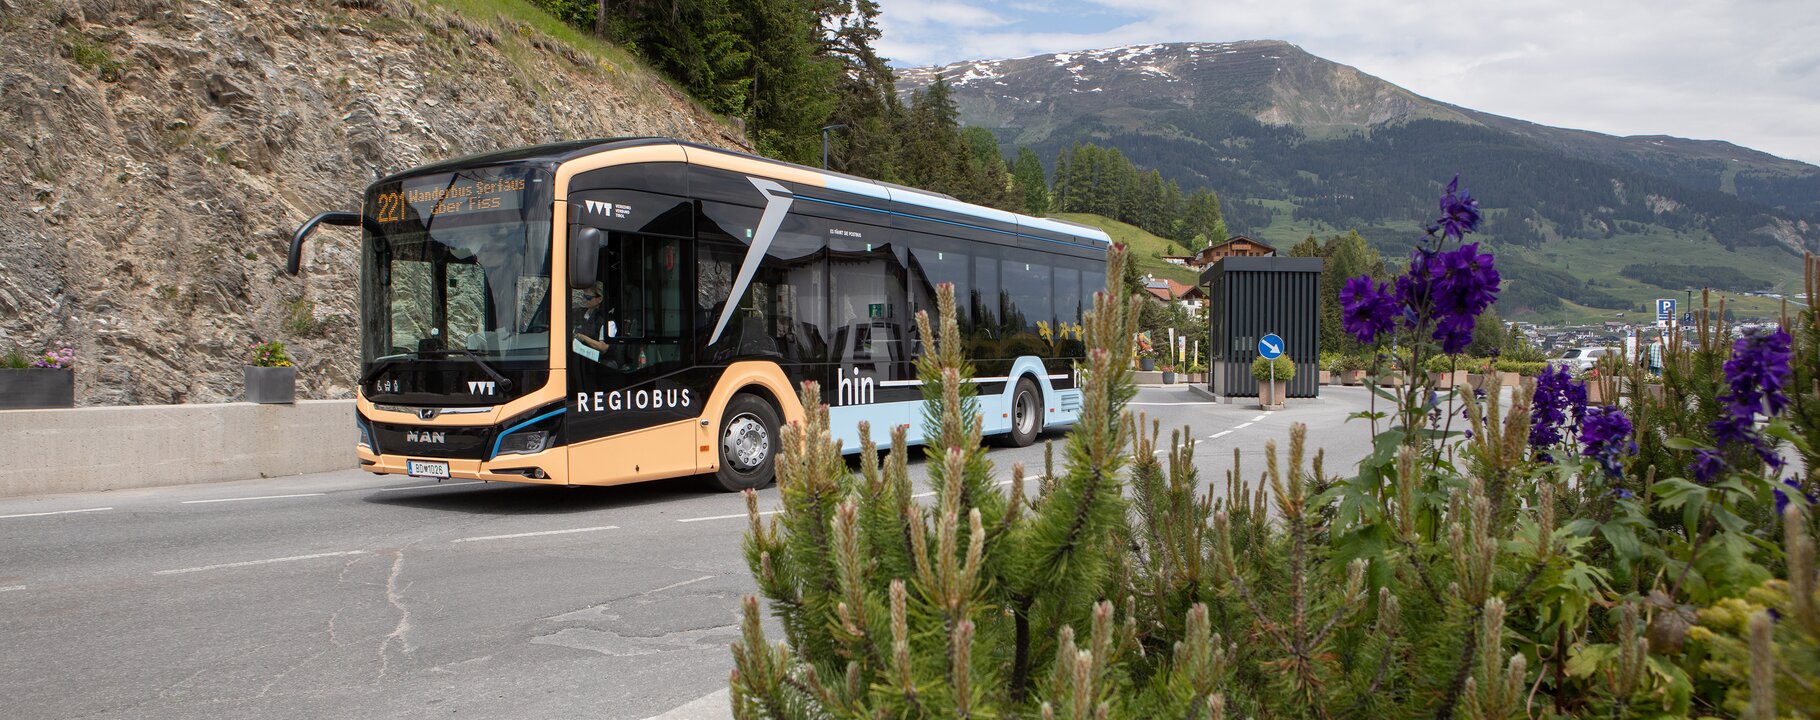 The hiker's bus in Serfaus-Fiss-Ladis in Tyrol | © Andreas Kirschner